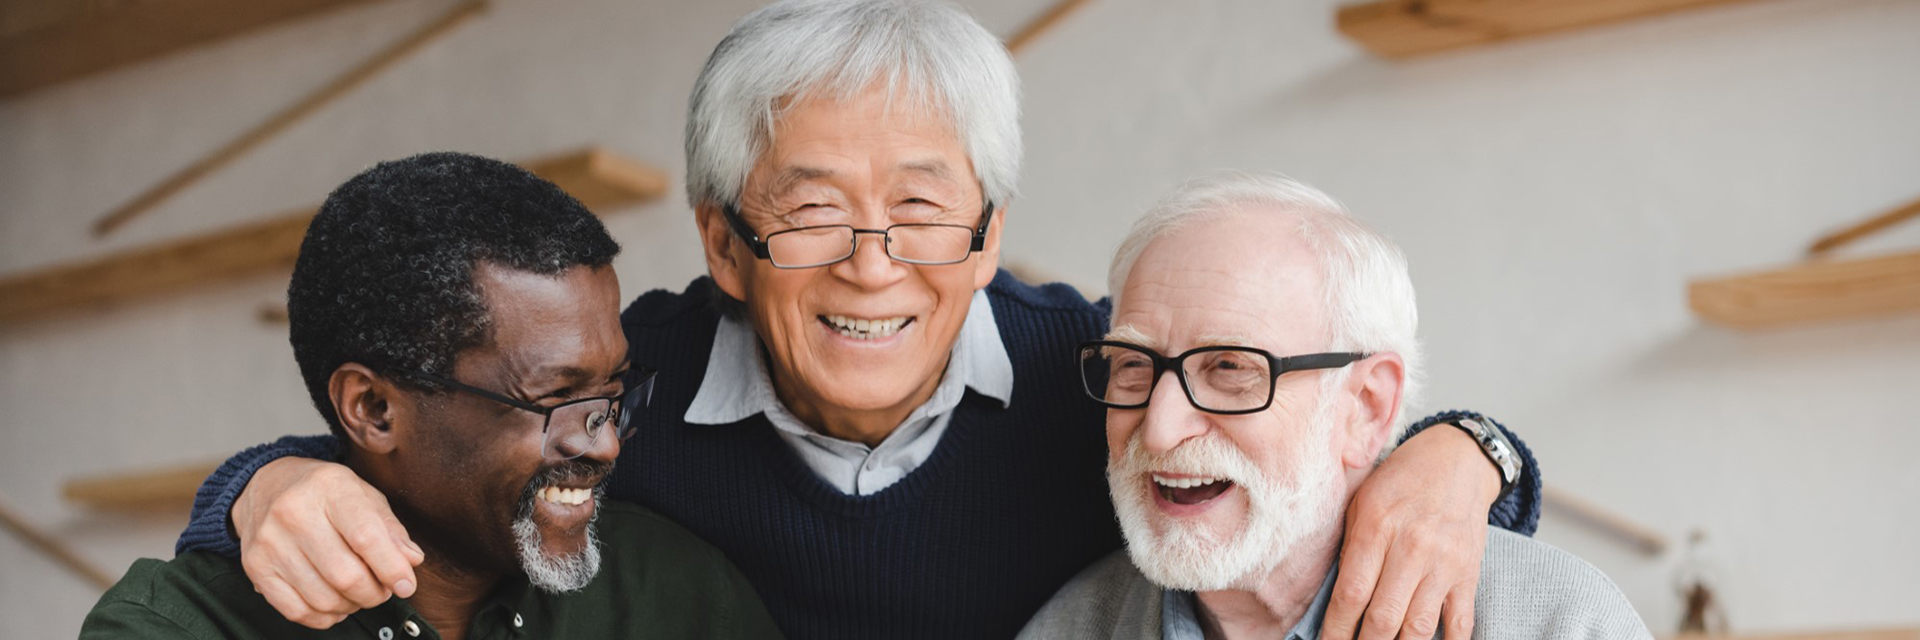 three men in glasses smiling arms around each other